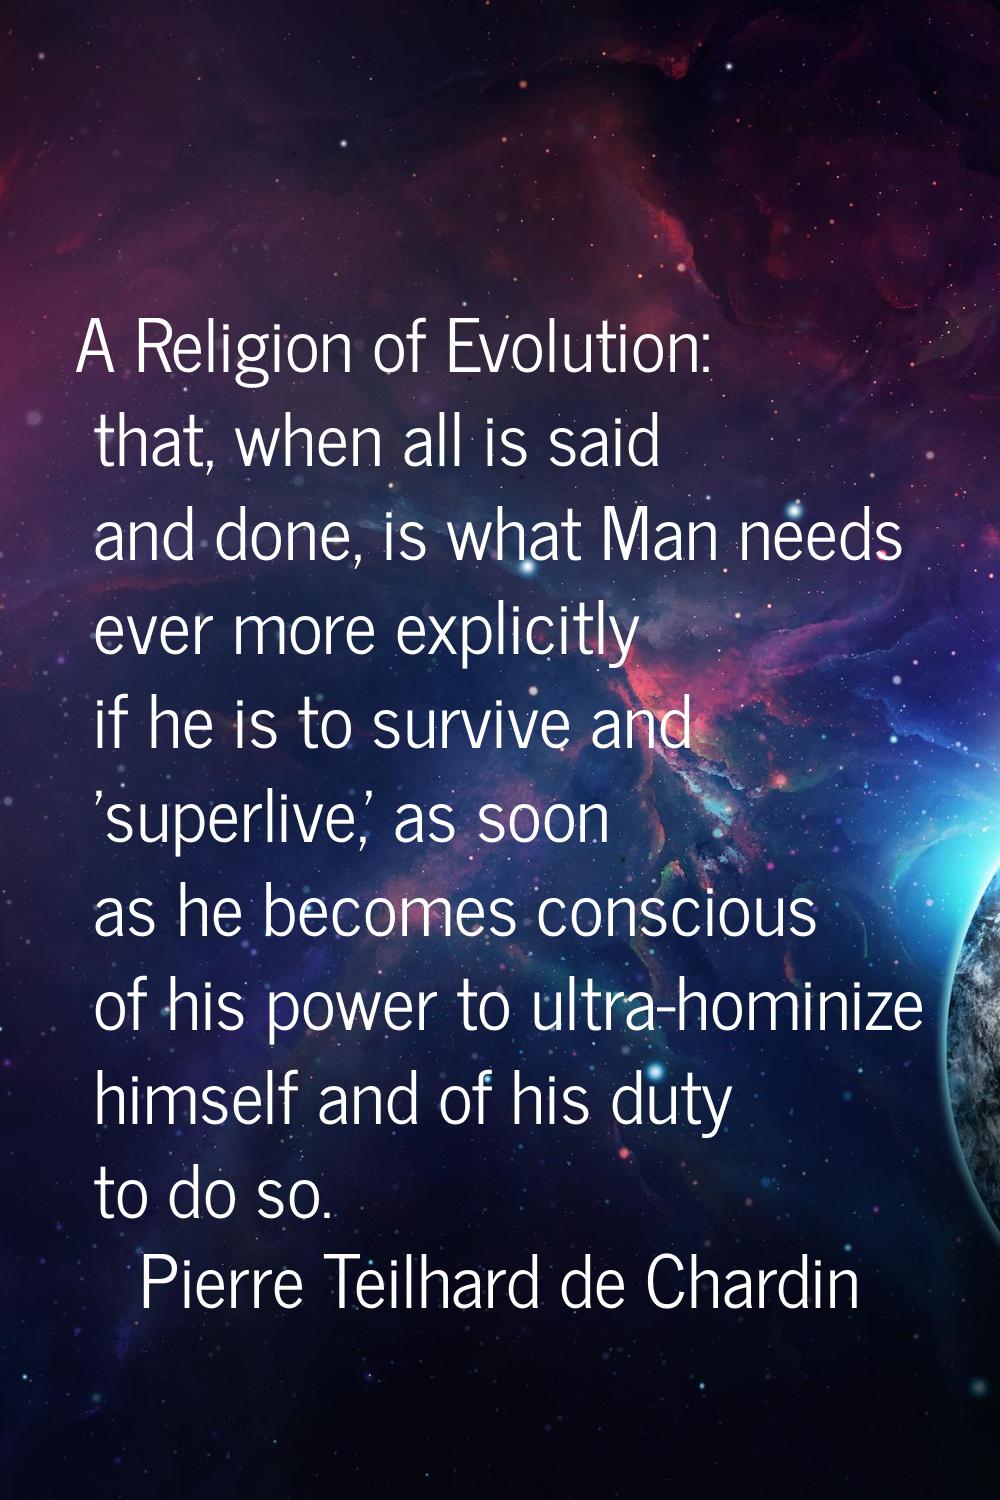 A Religion of Evolution: that, when all is said and done, is what Man needs ever more explicitly if